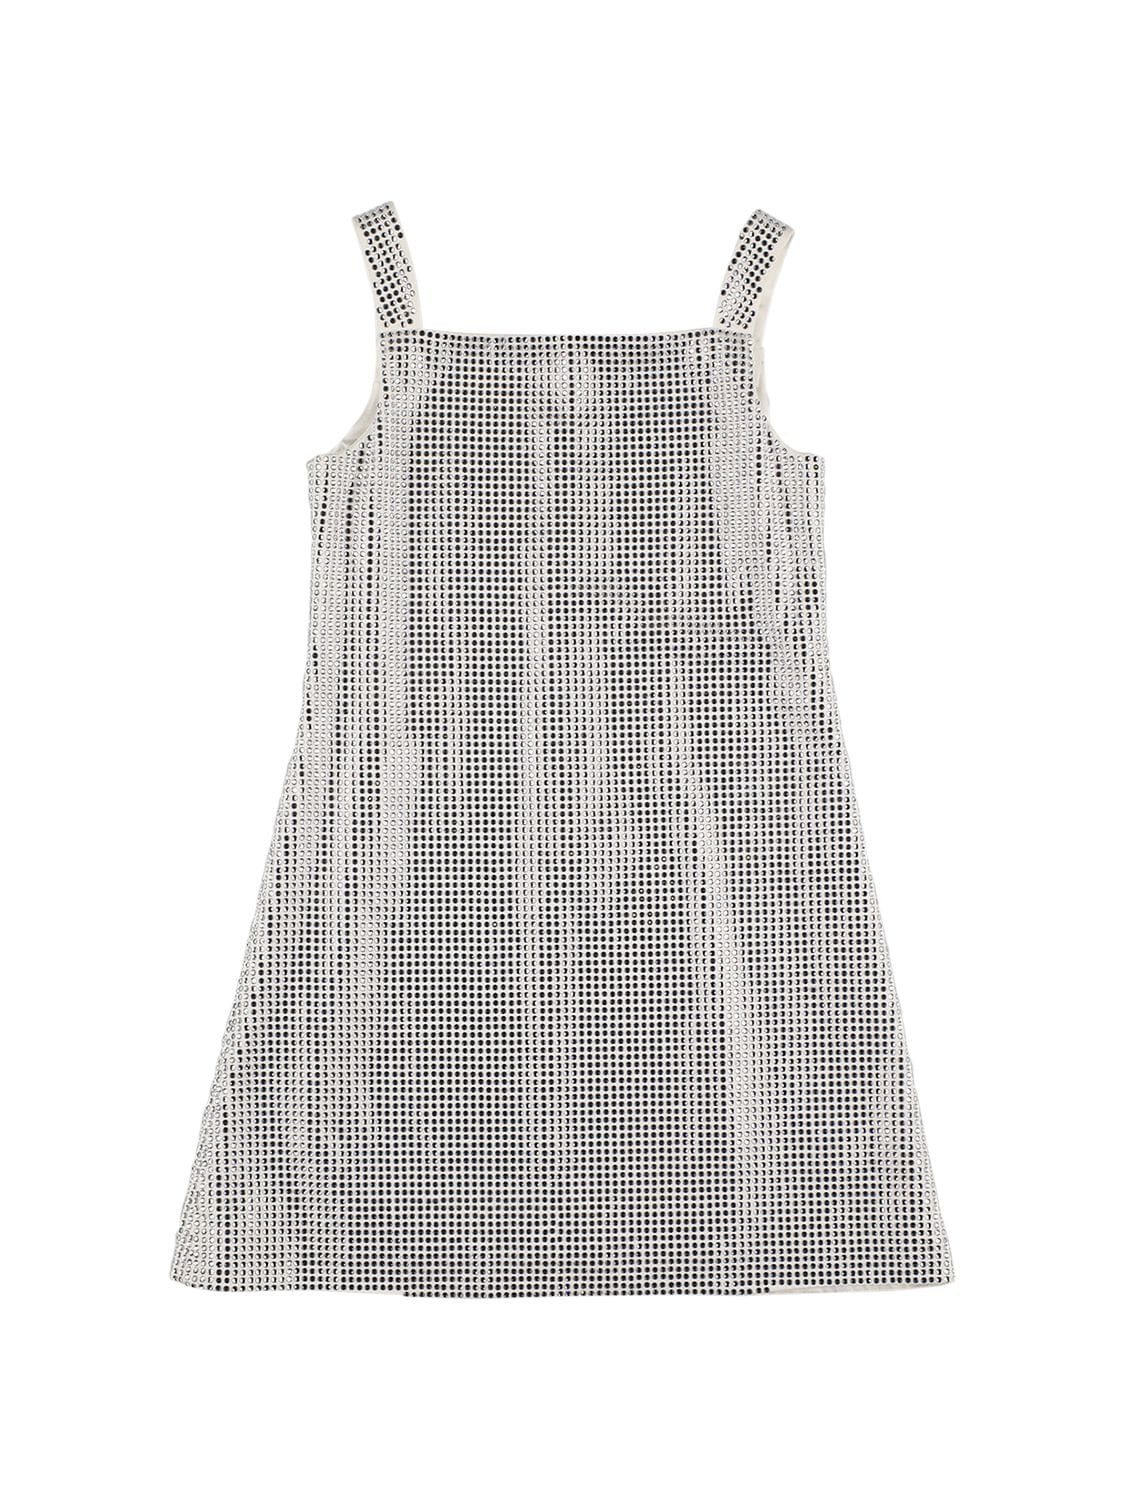 Dolce & Gabbana Kids' Sequined Cotton Party Dress In Silver